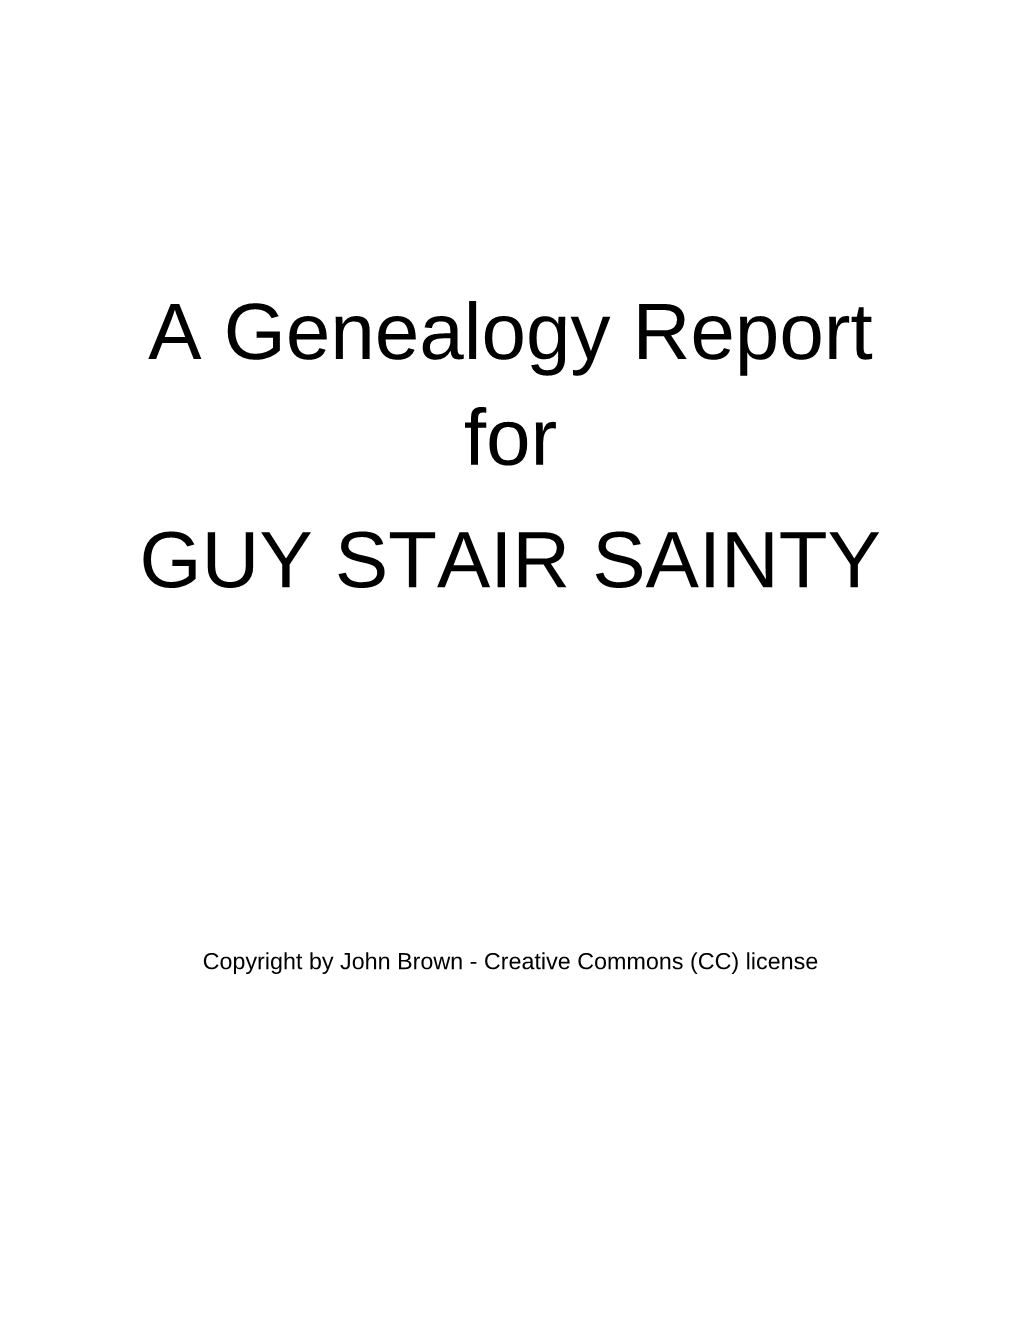 A Genealogy Report for GUY STAIR SAINTY